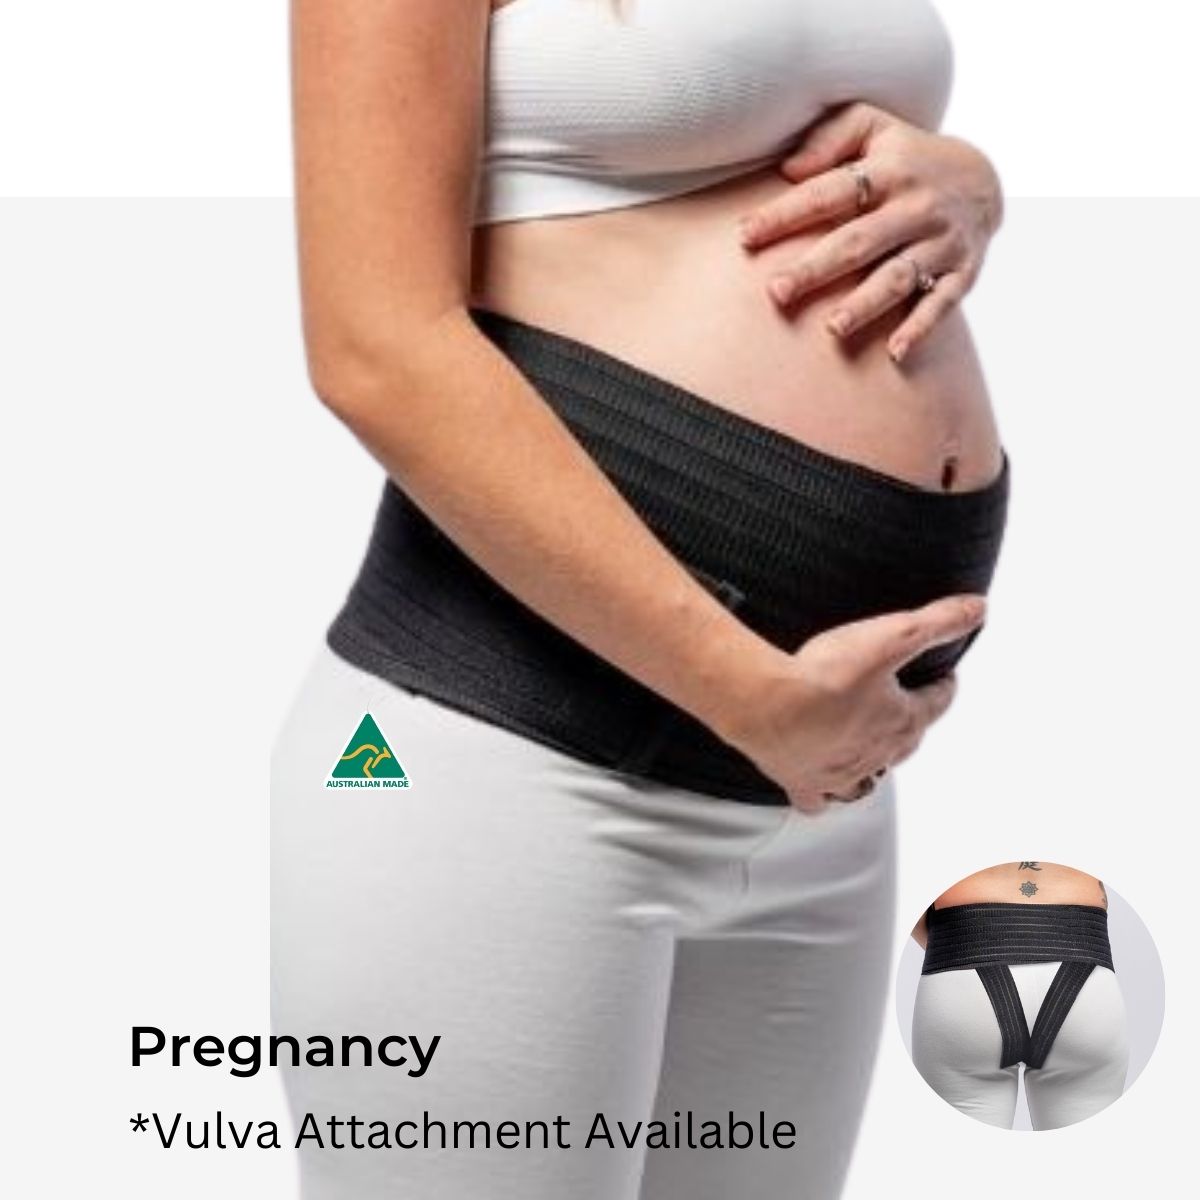 3-in-1 Belly Band for Pregnancy, Postpartum, C-section